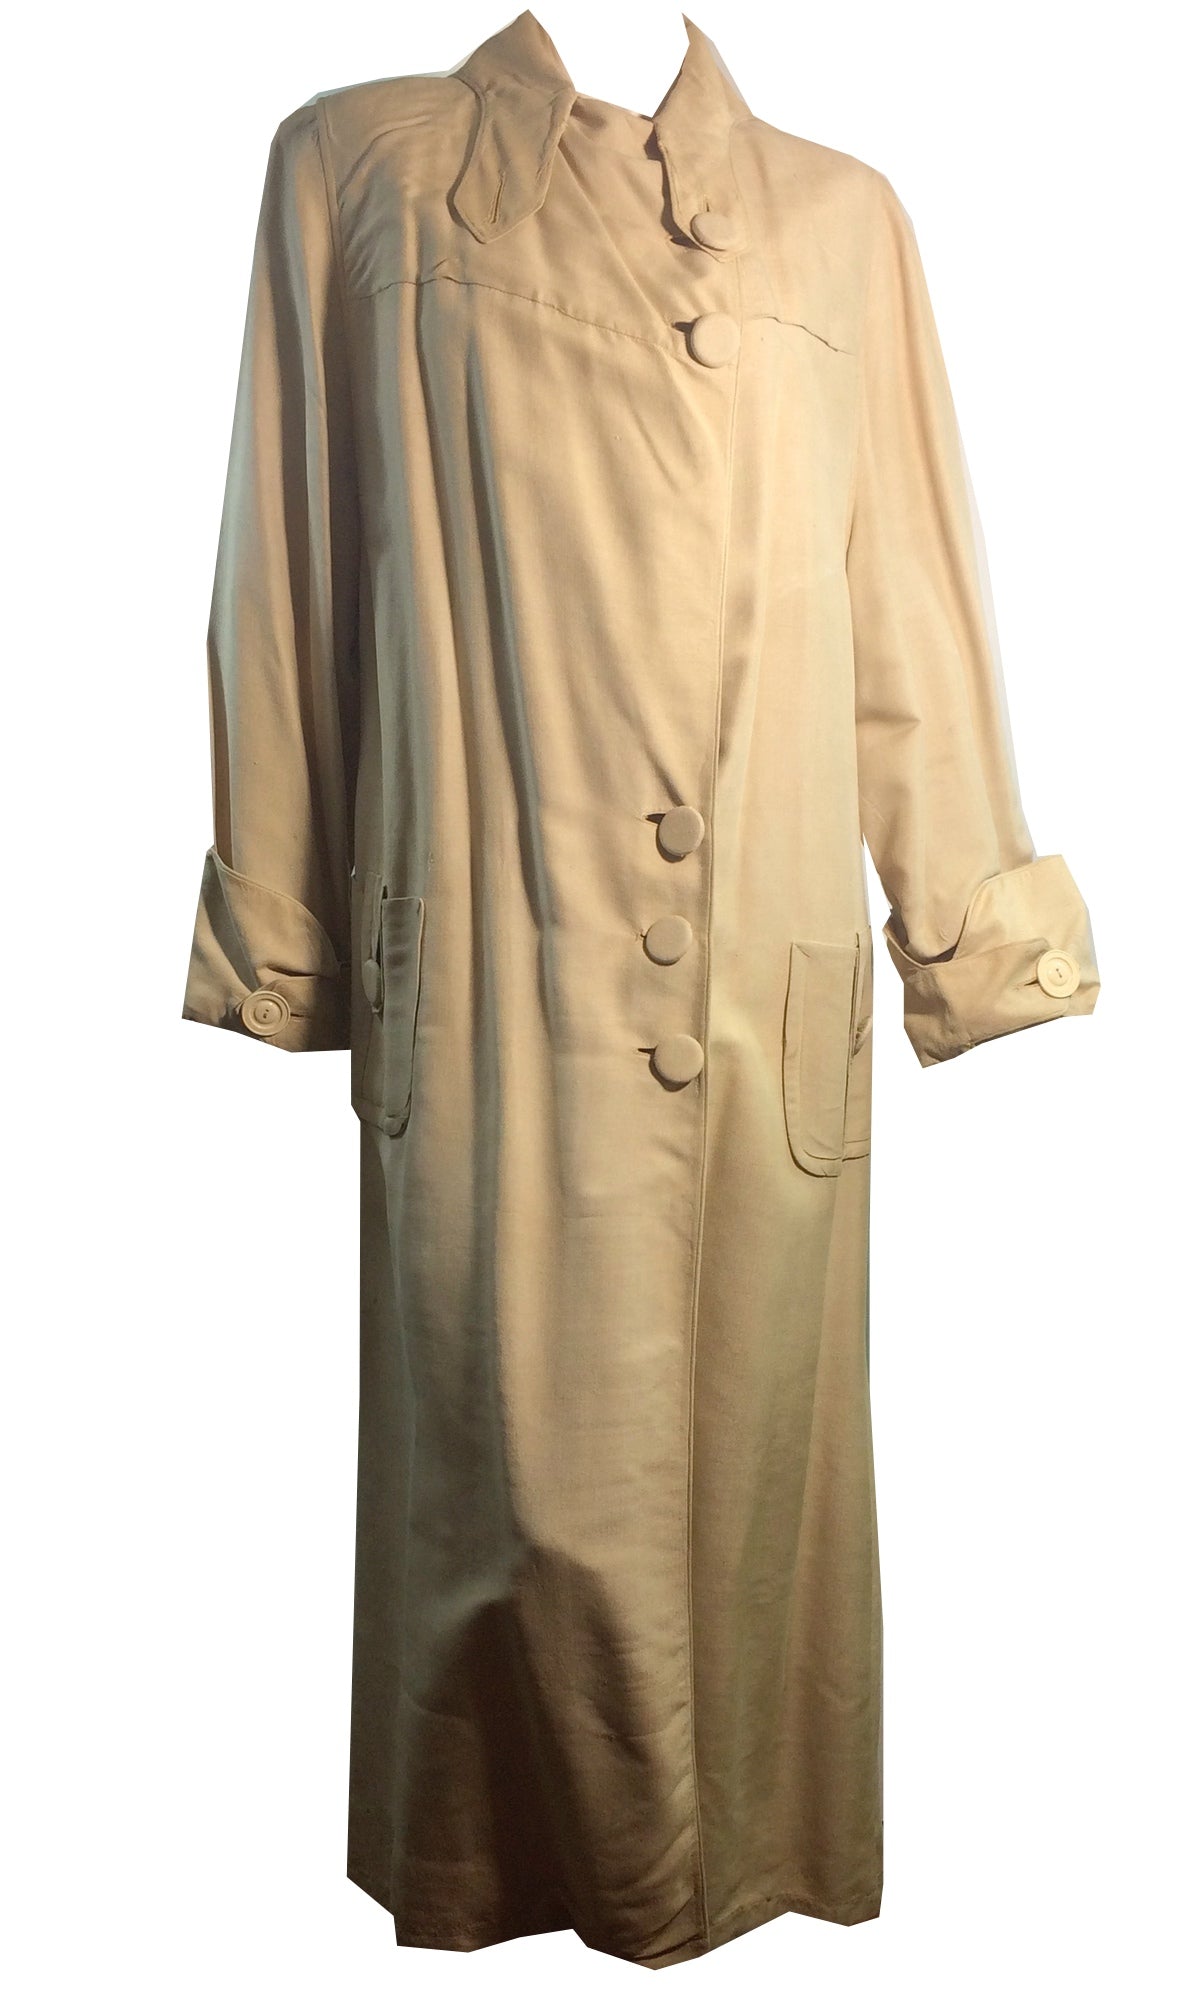 Ivory Linen Button Trimmed Car Coat circa Early 1900s